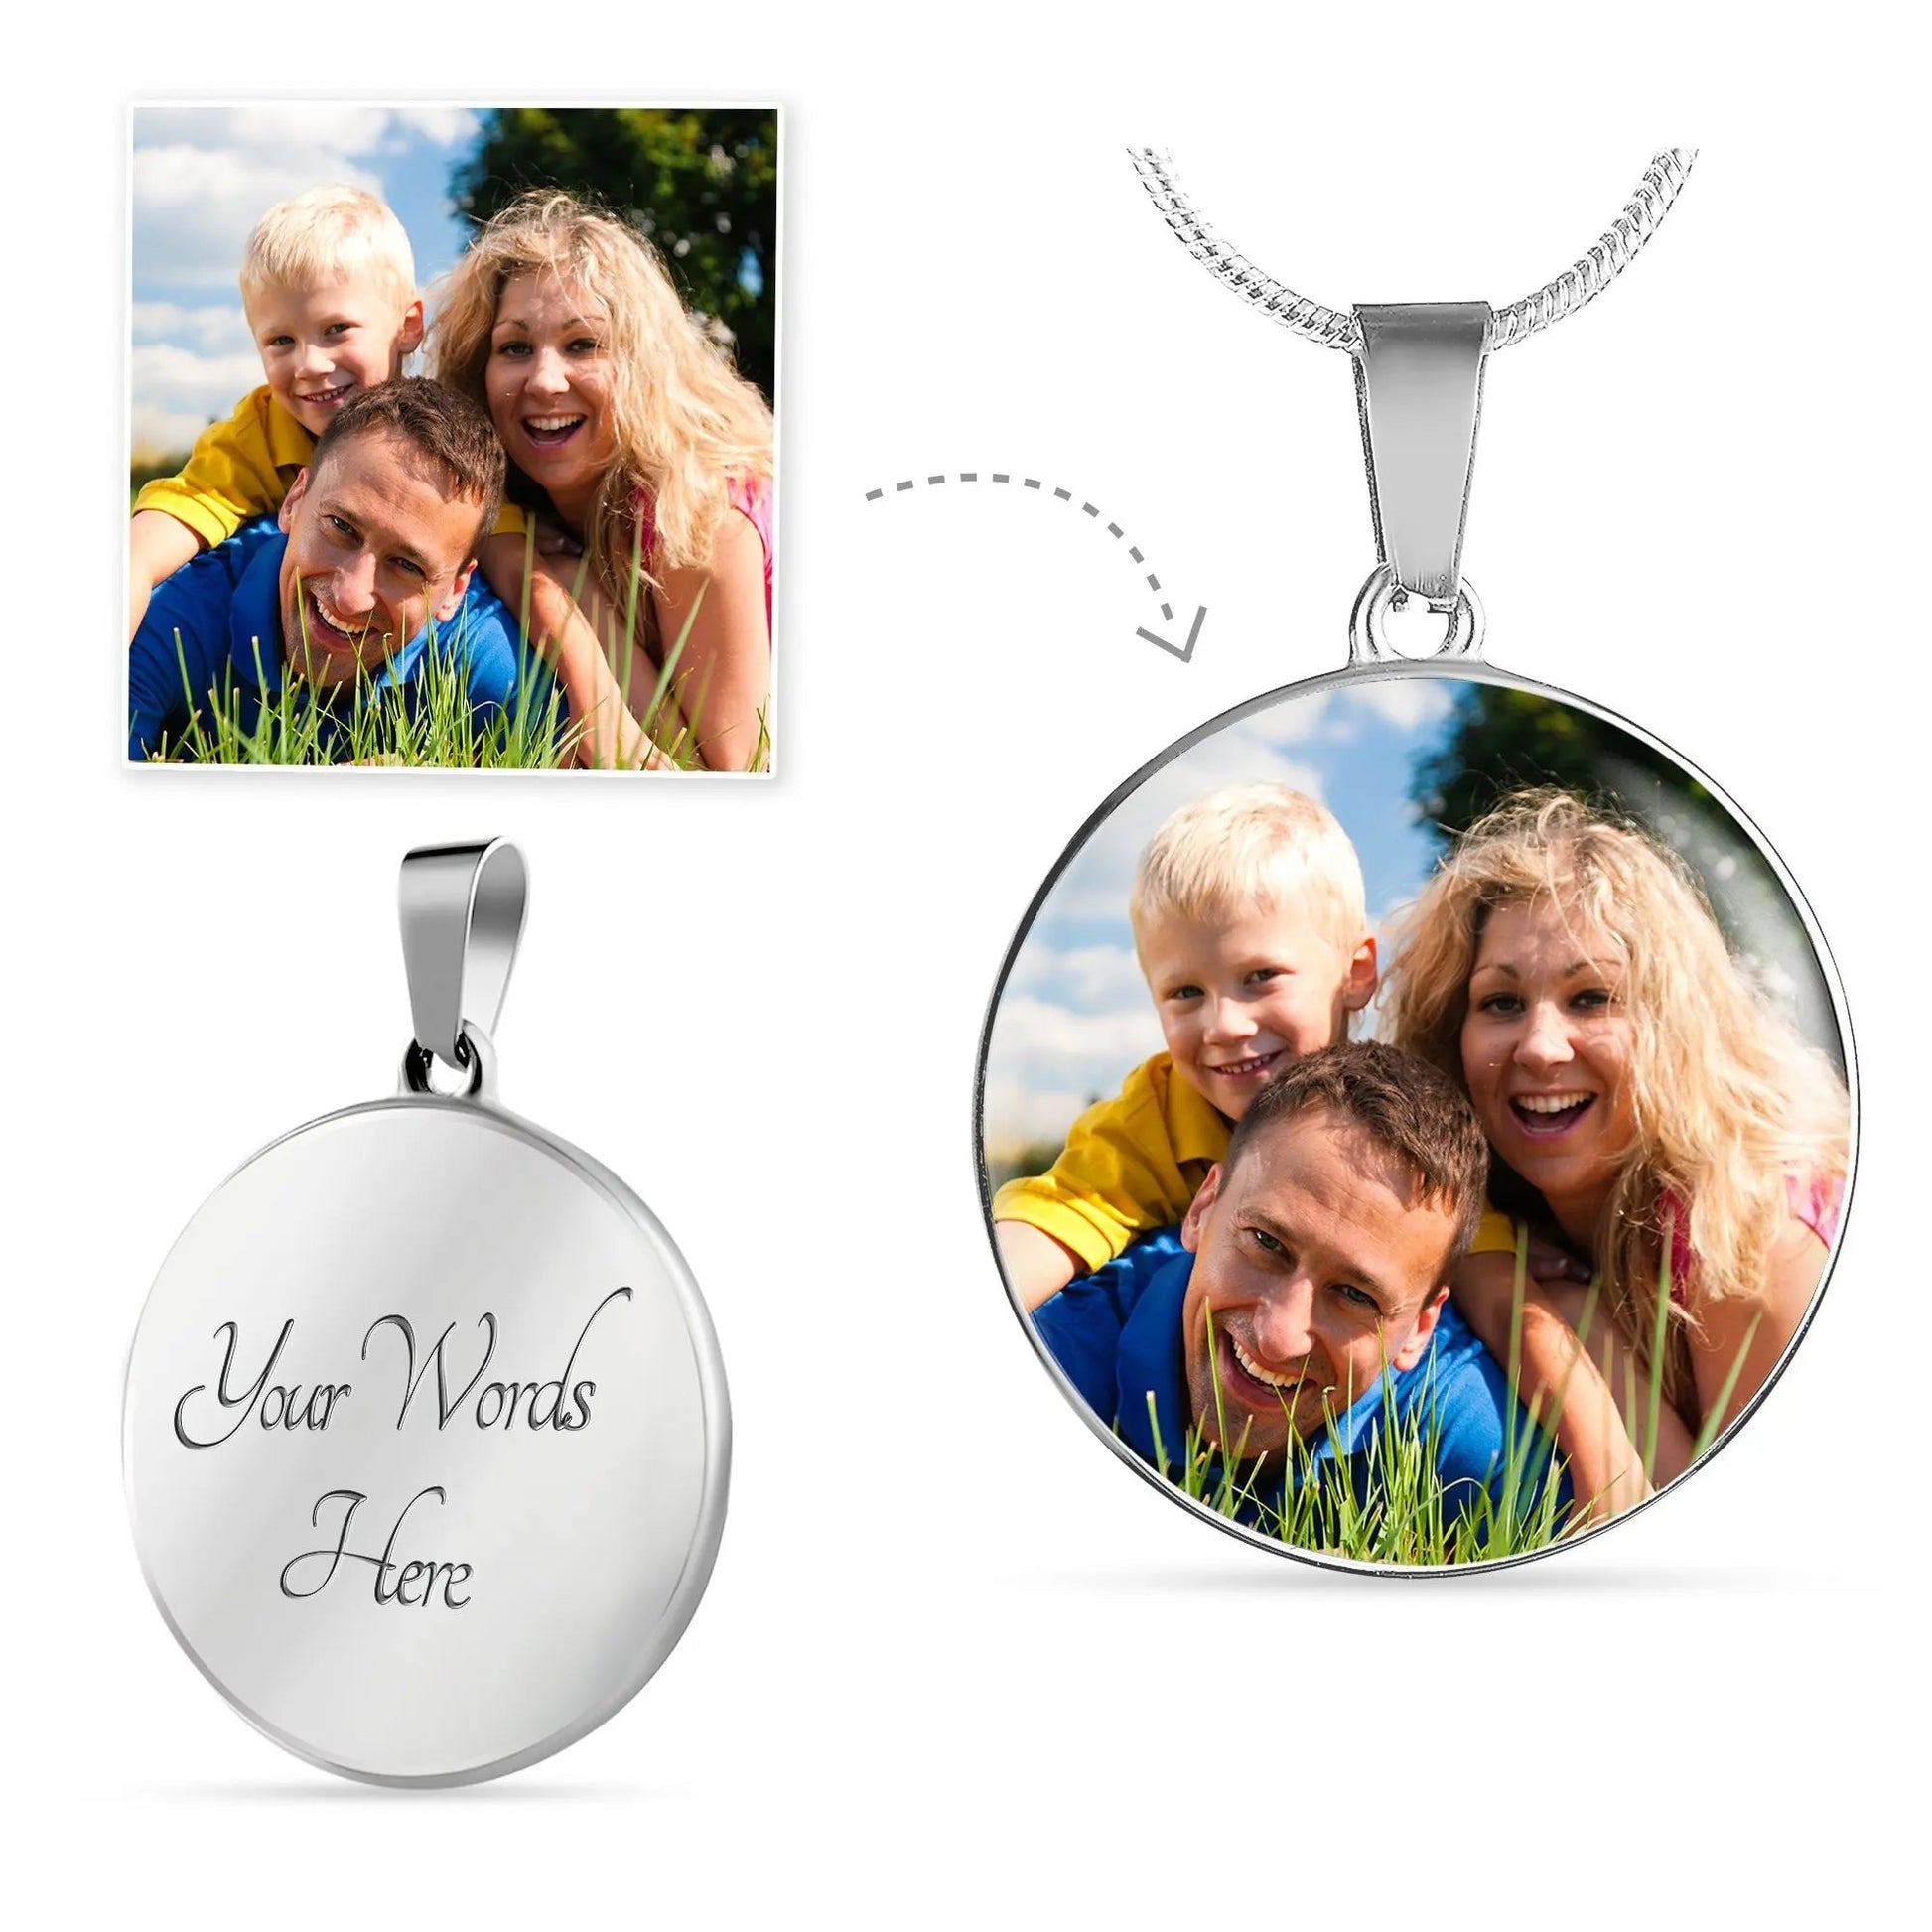 CardWelry Personalized Photo Necklace, Custom Photo Pendant Memory Necklace with Picture, Customized Picture Necklace For Her, Women Necklace Gifts Jewelry Luxury Necklace (Silver) Yes